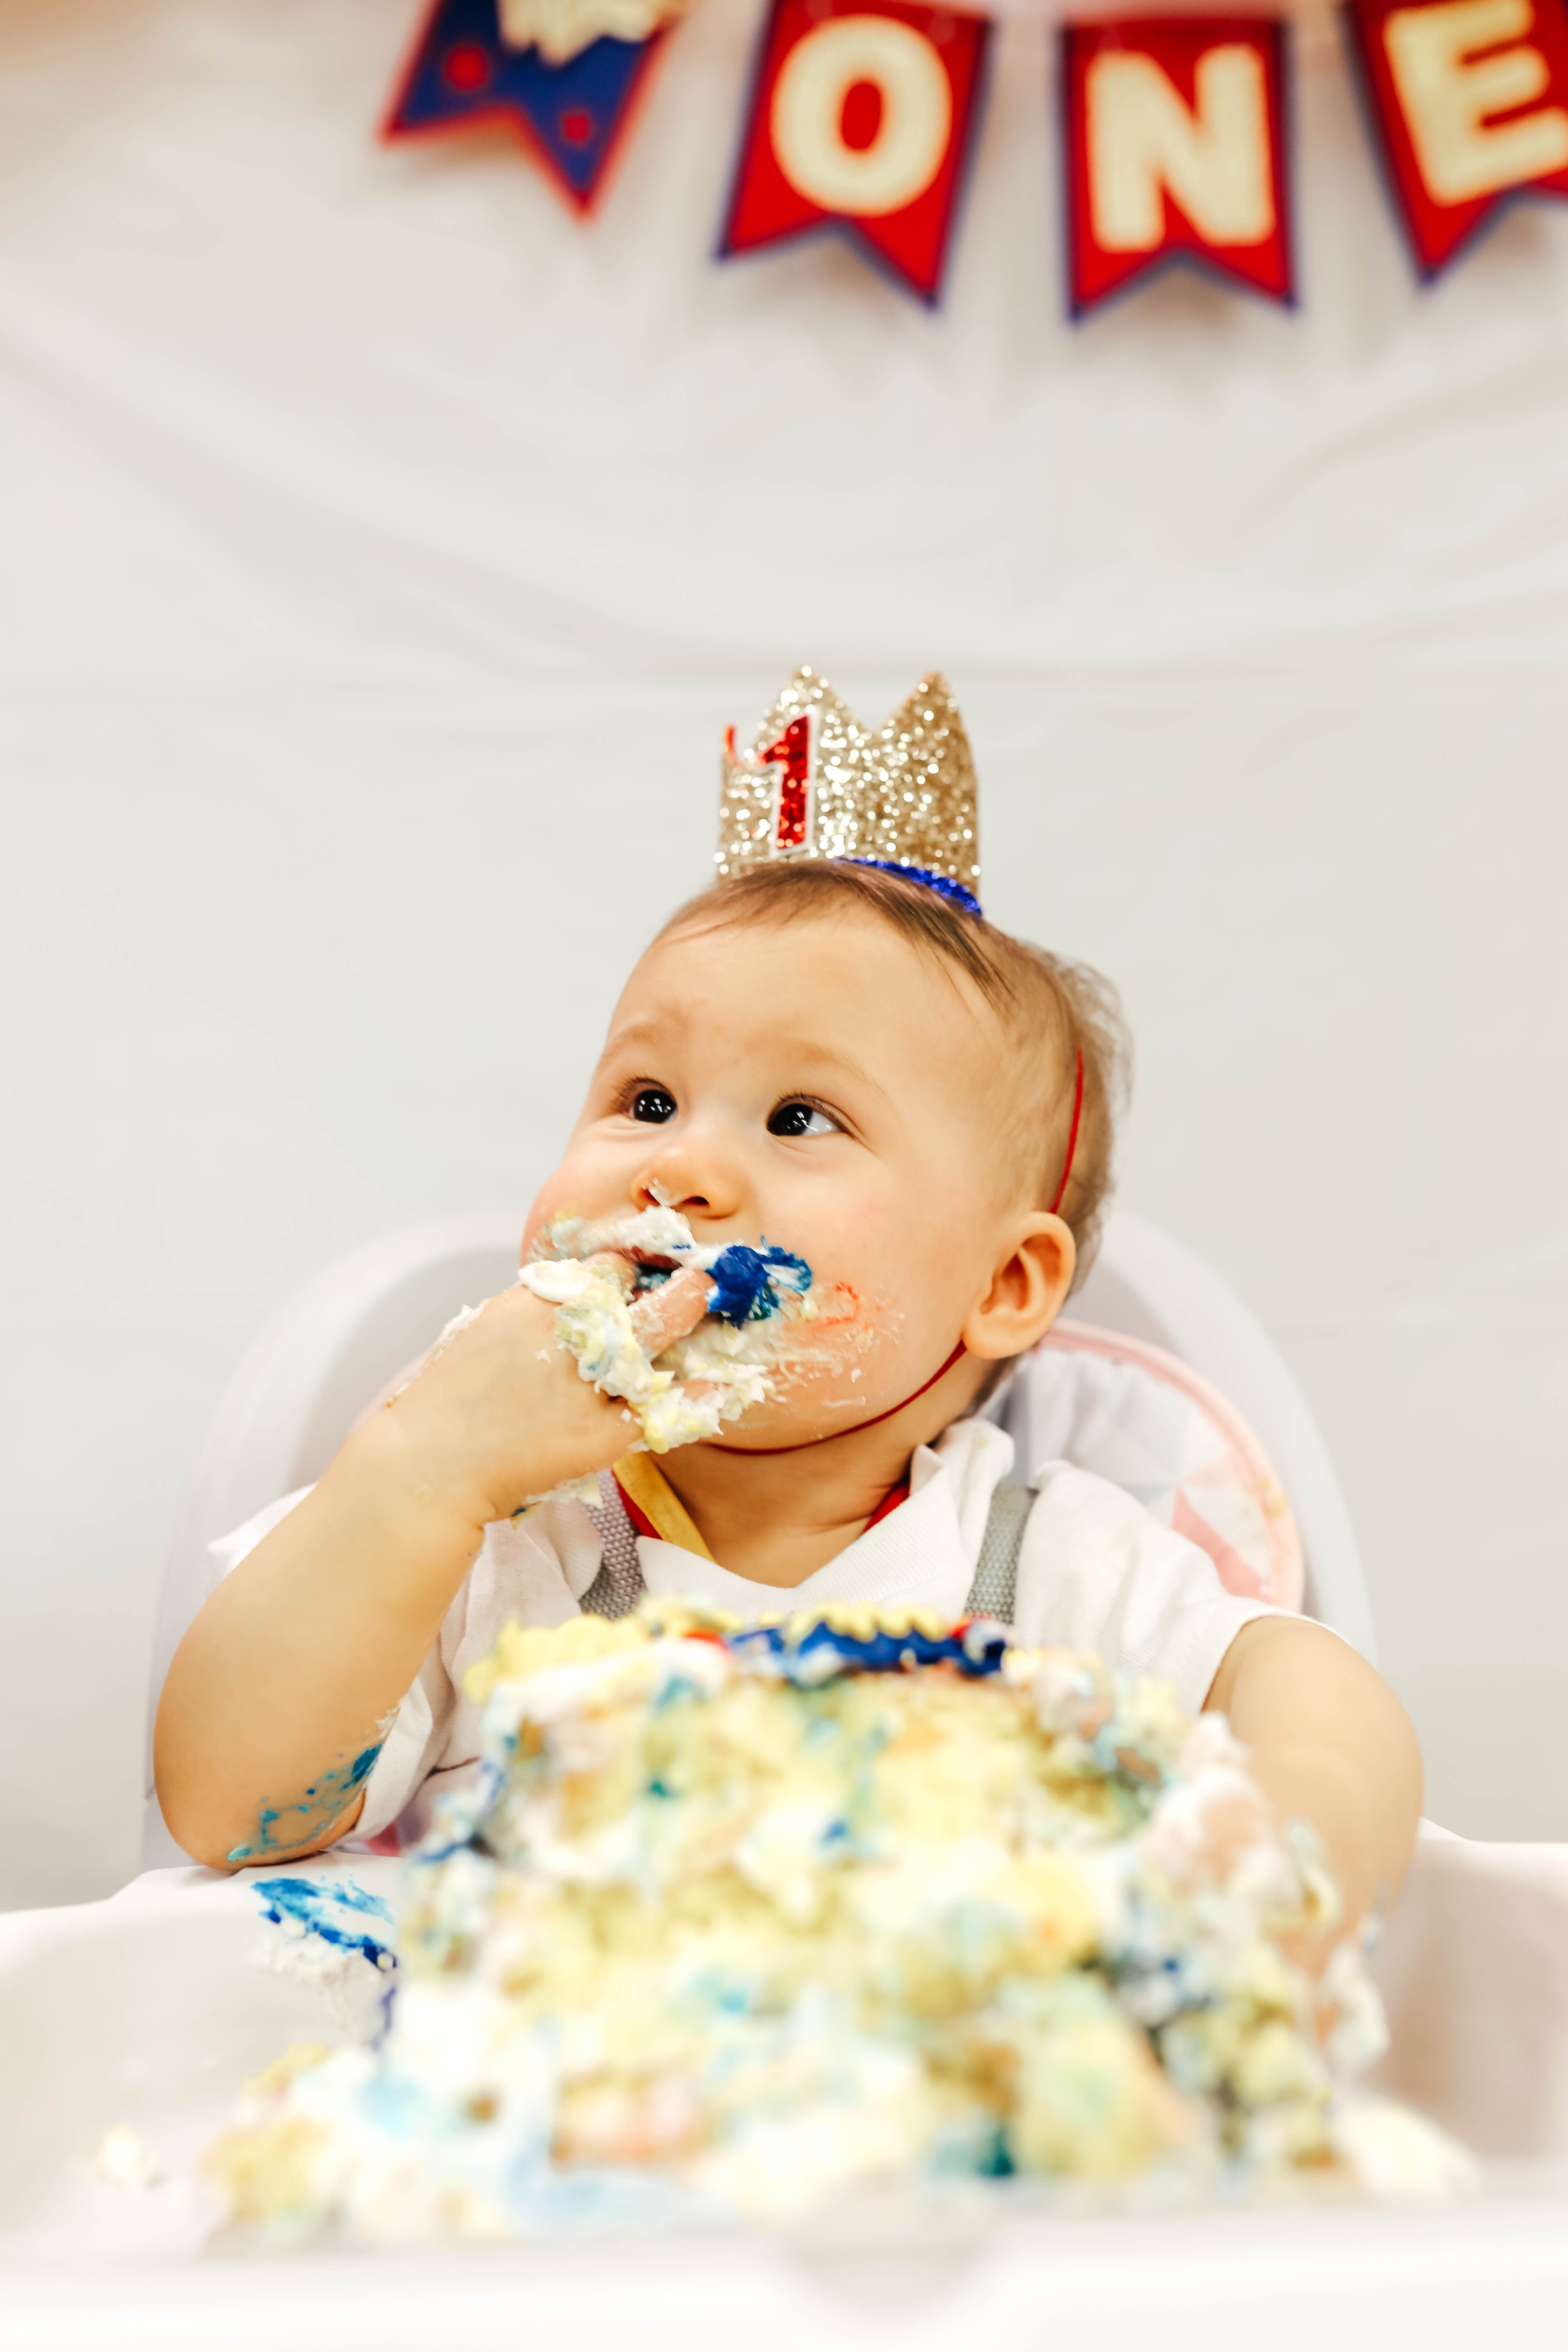 ONEder Woman 1st Birthdy Party for Olivia Grace - eating smash cake on Coming Up Roses